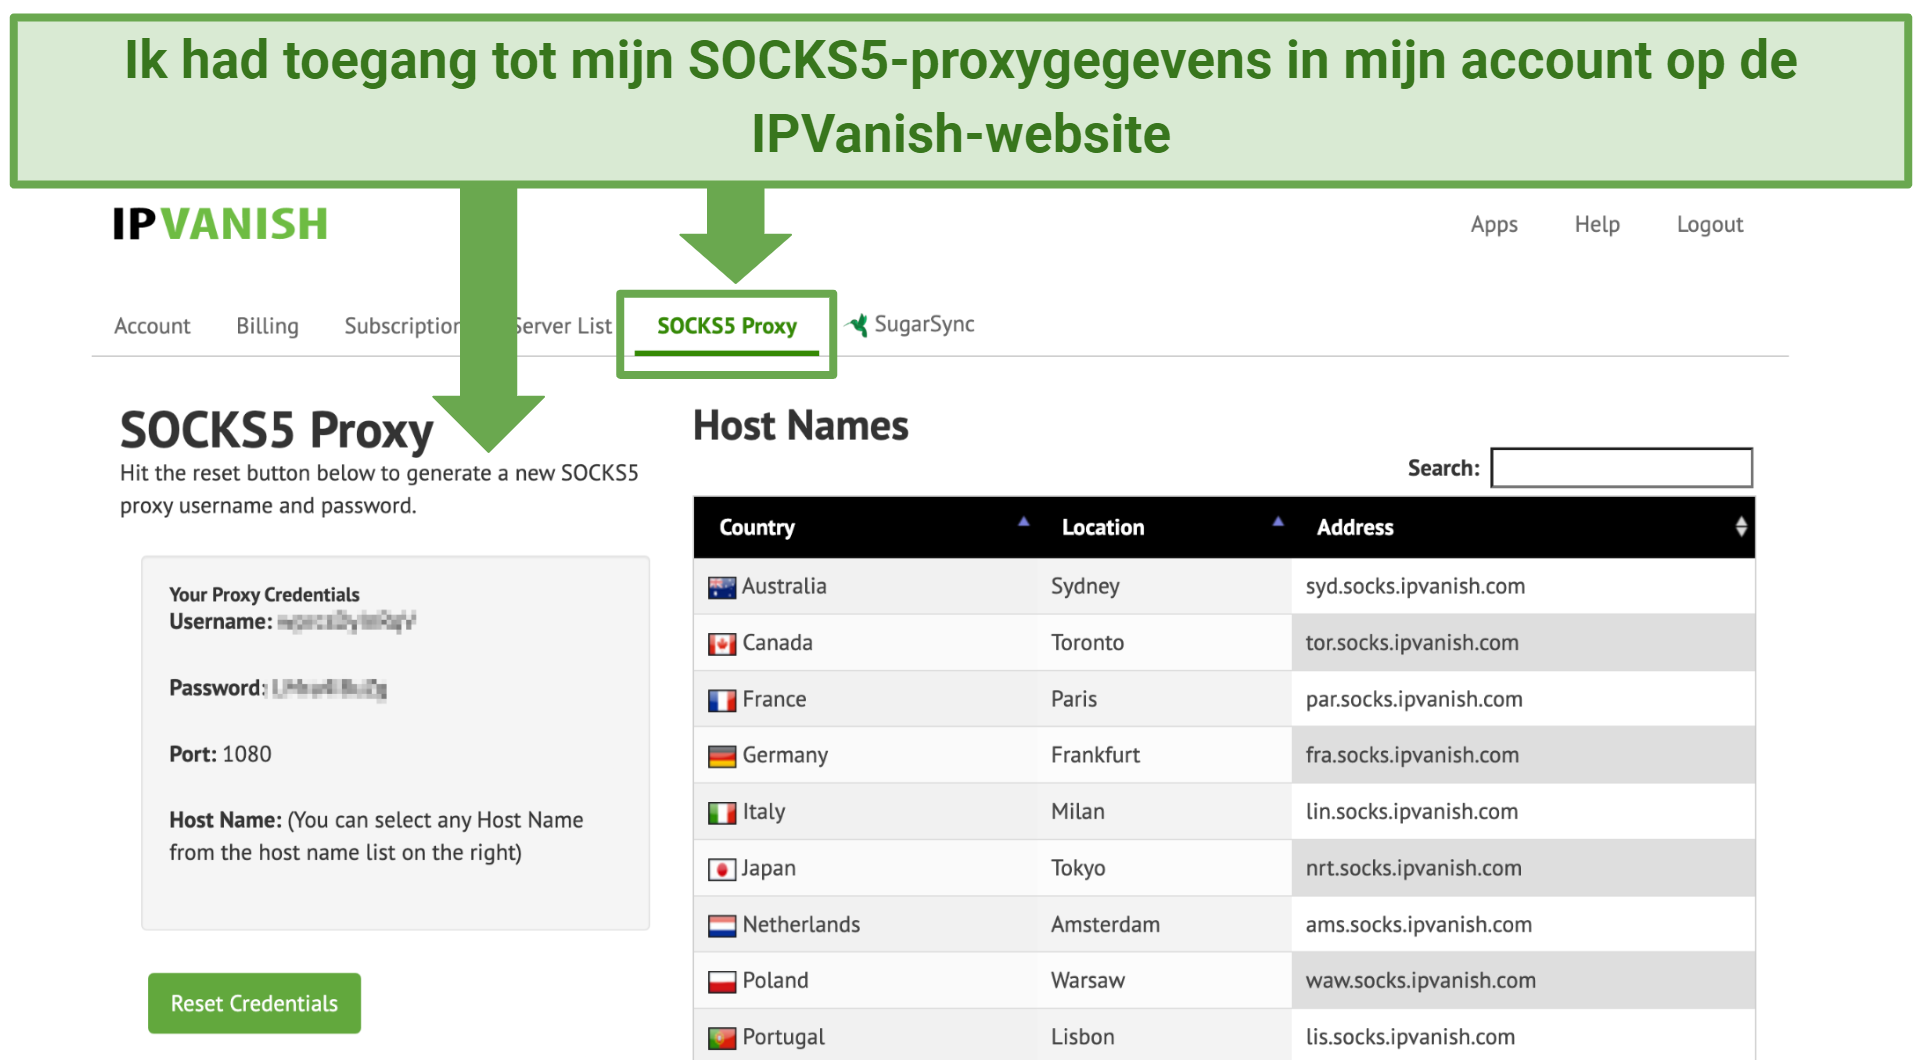 Screenshot showing how to navigate the IPVanish website to access your SOCKS5 proxy details